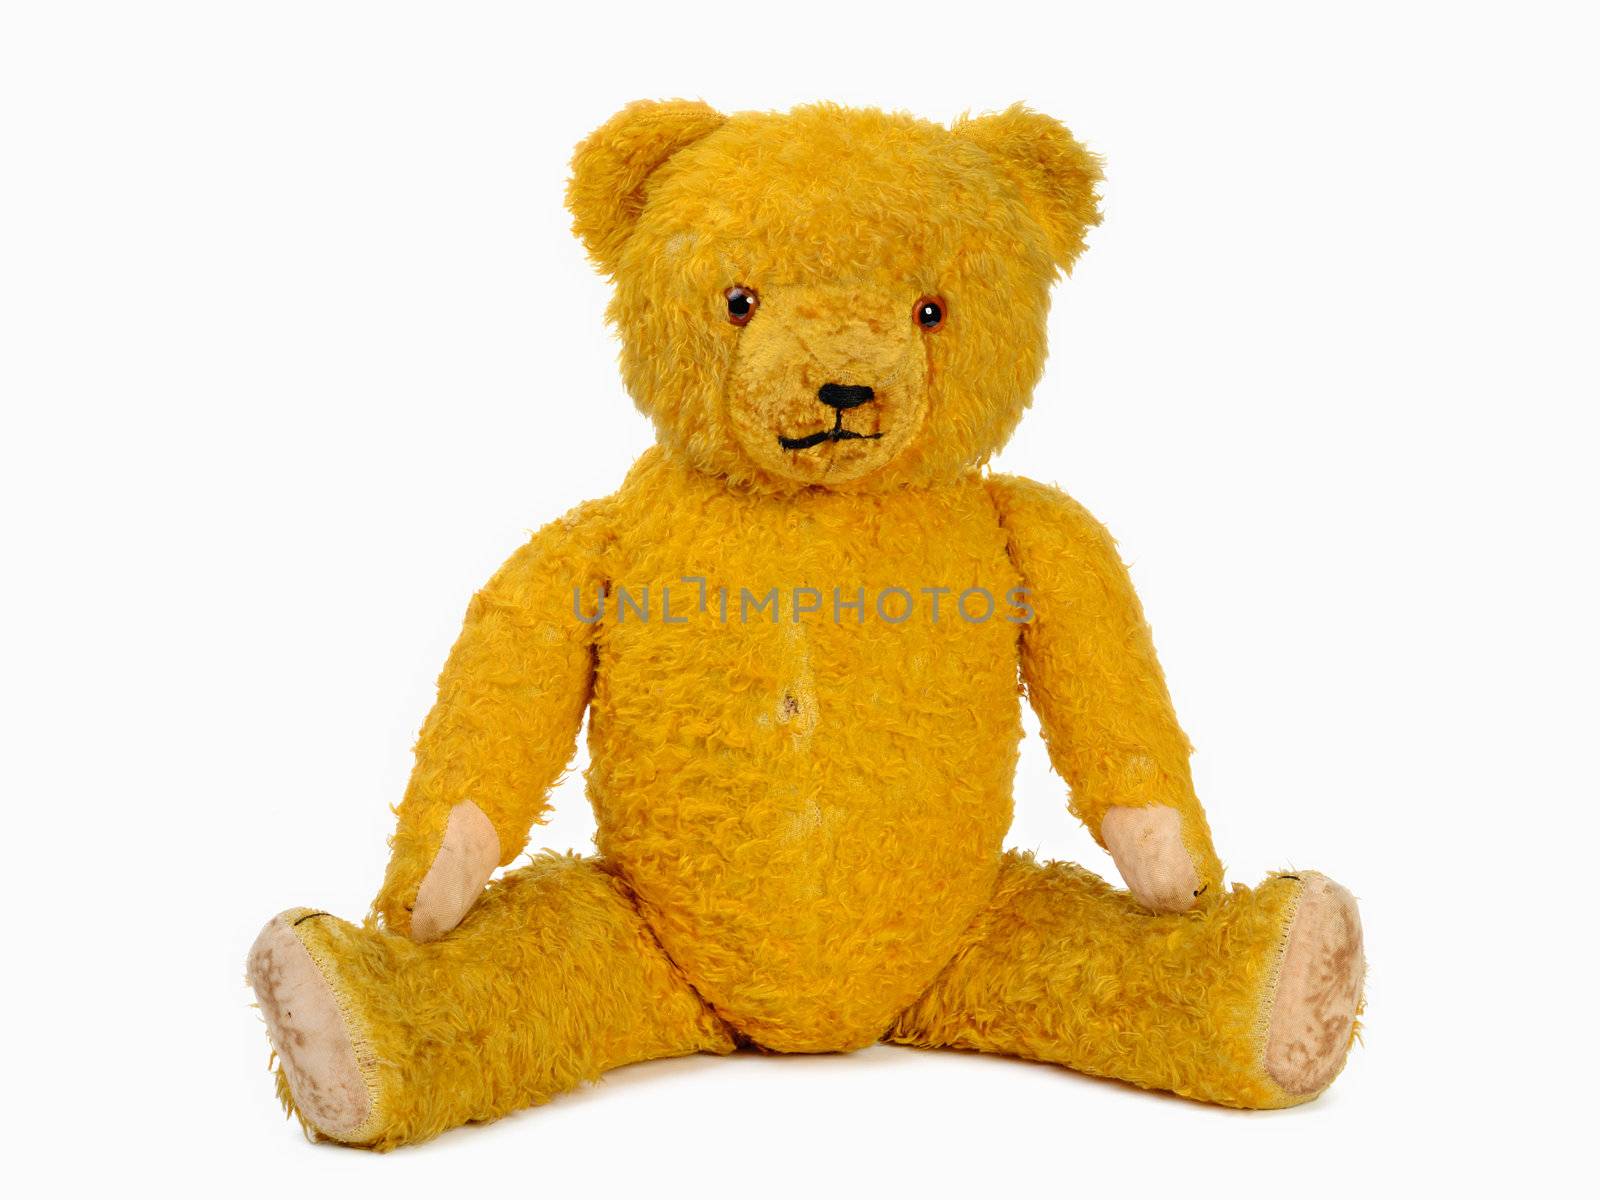 Classic teddy bear isolated on white background